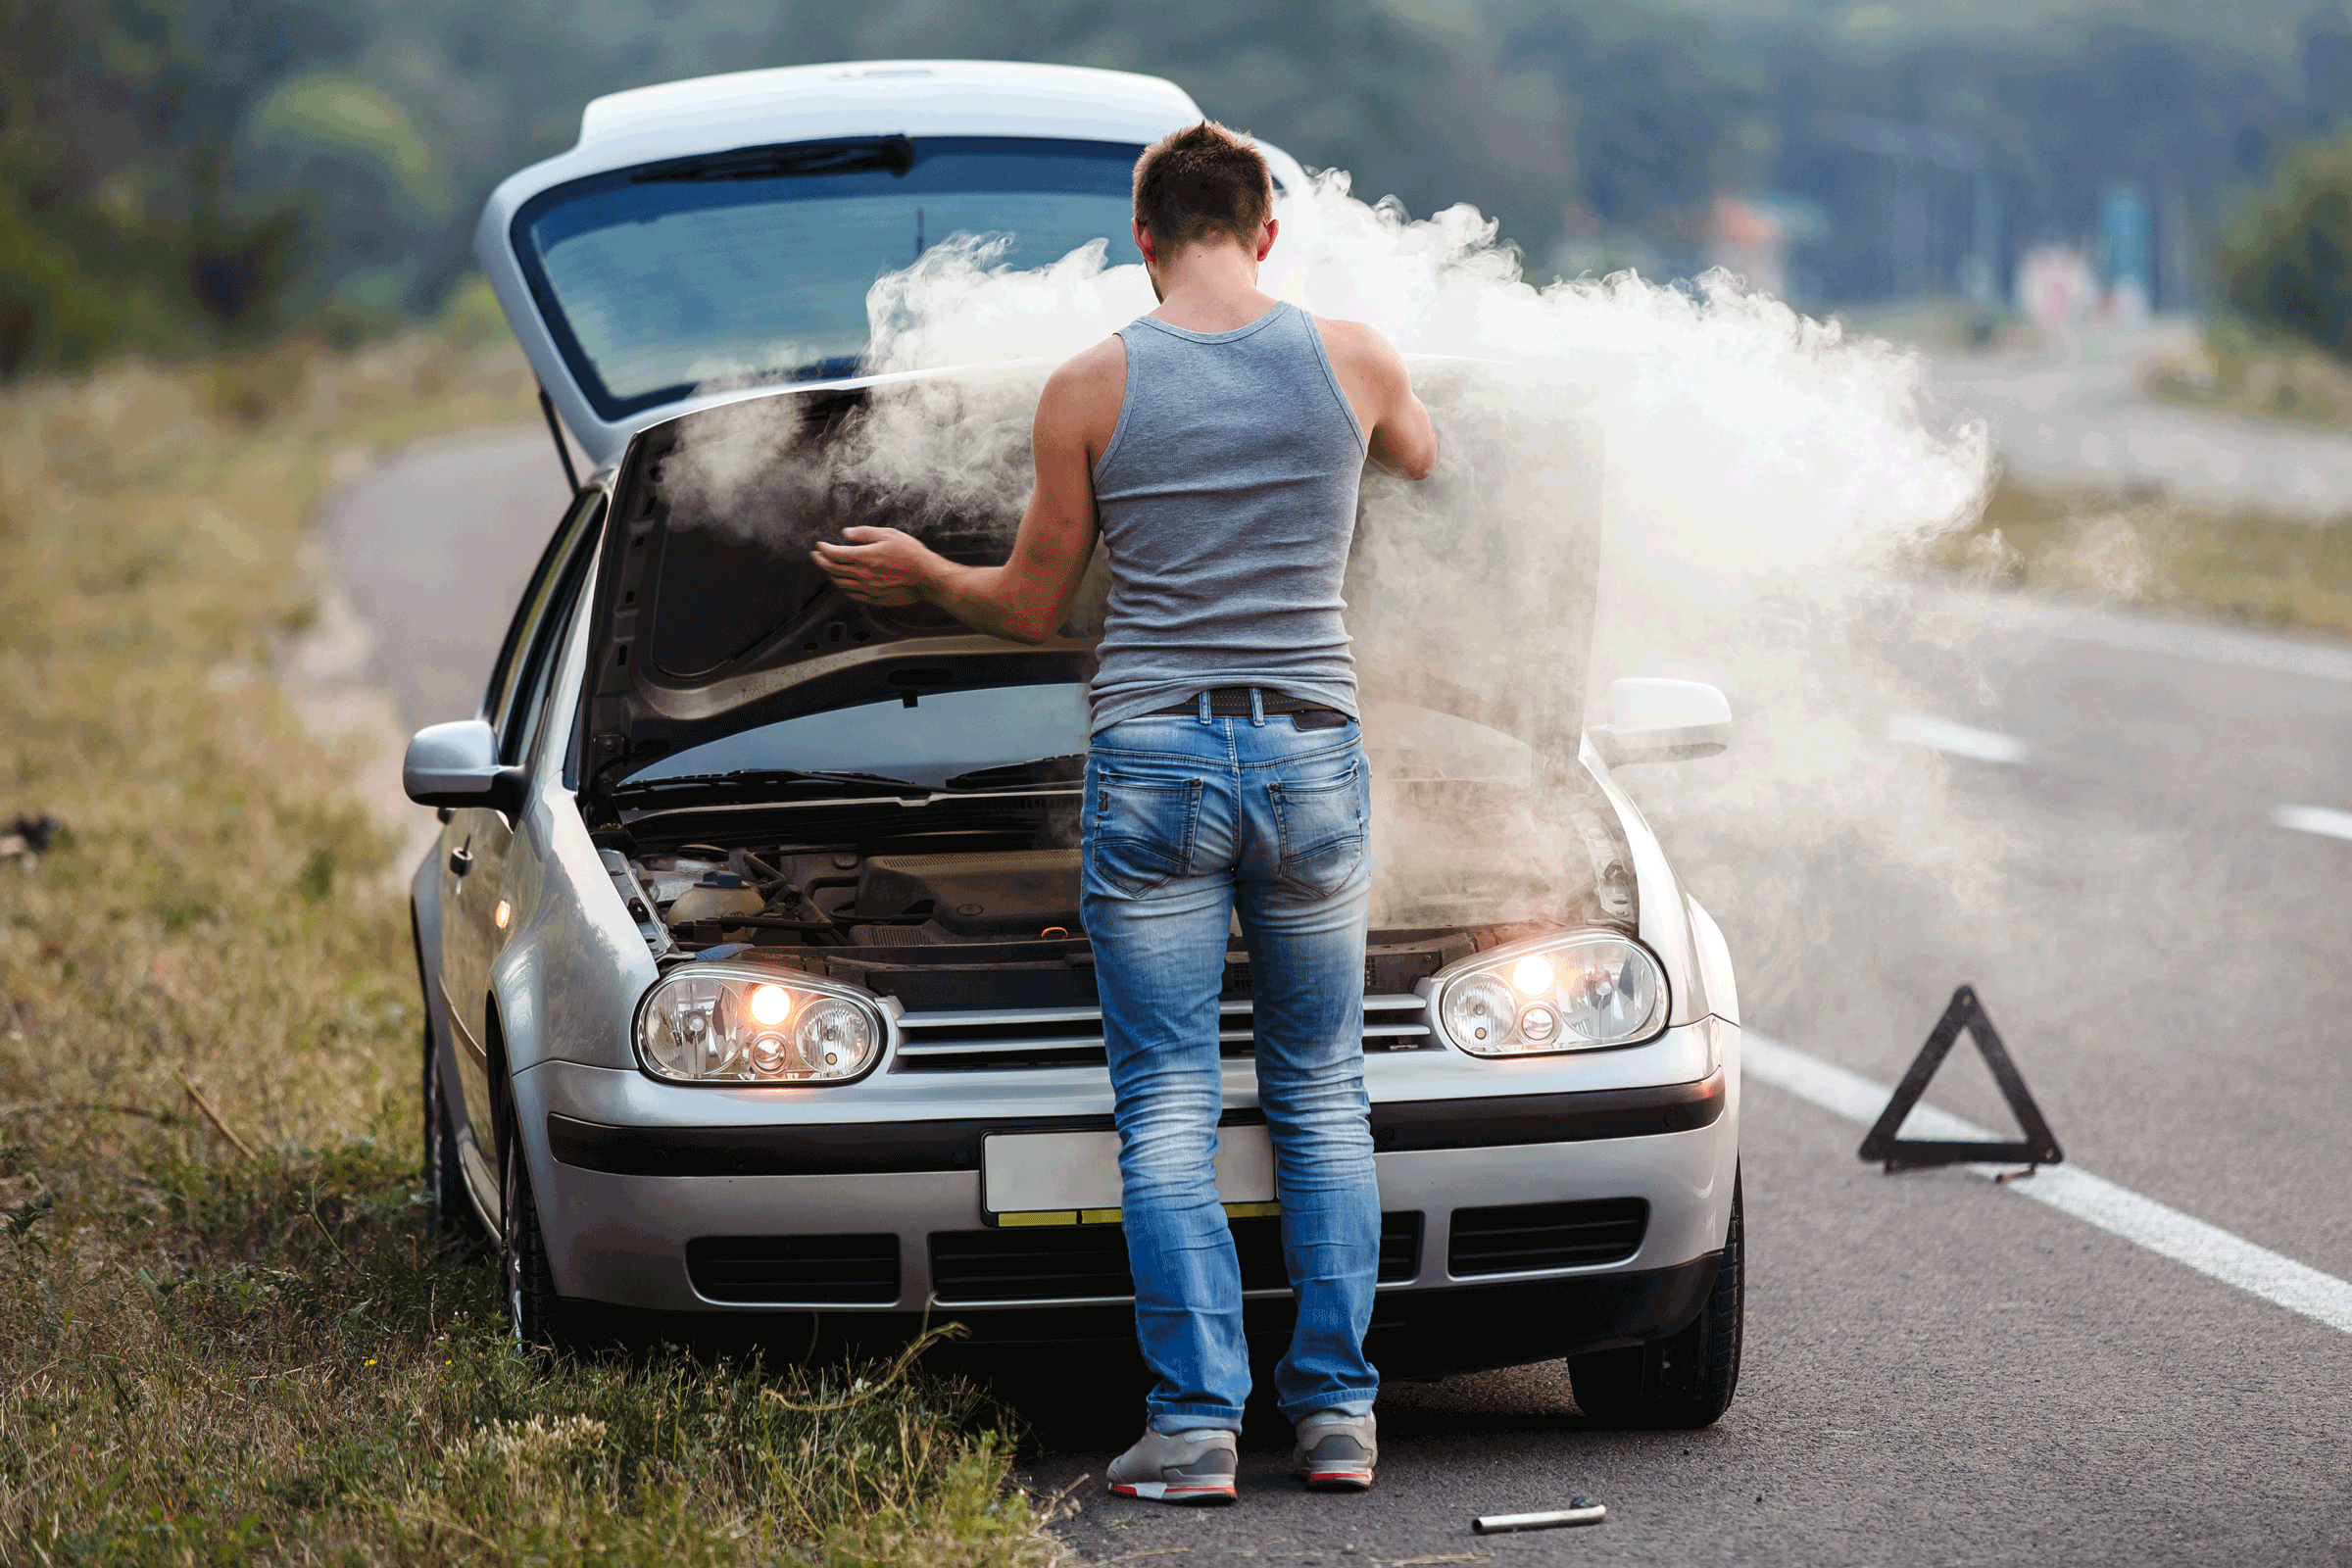 What to Do When Facing the High Cost of Emergency Car Repairs